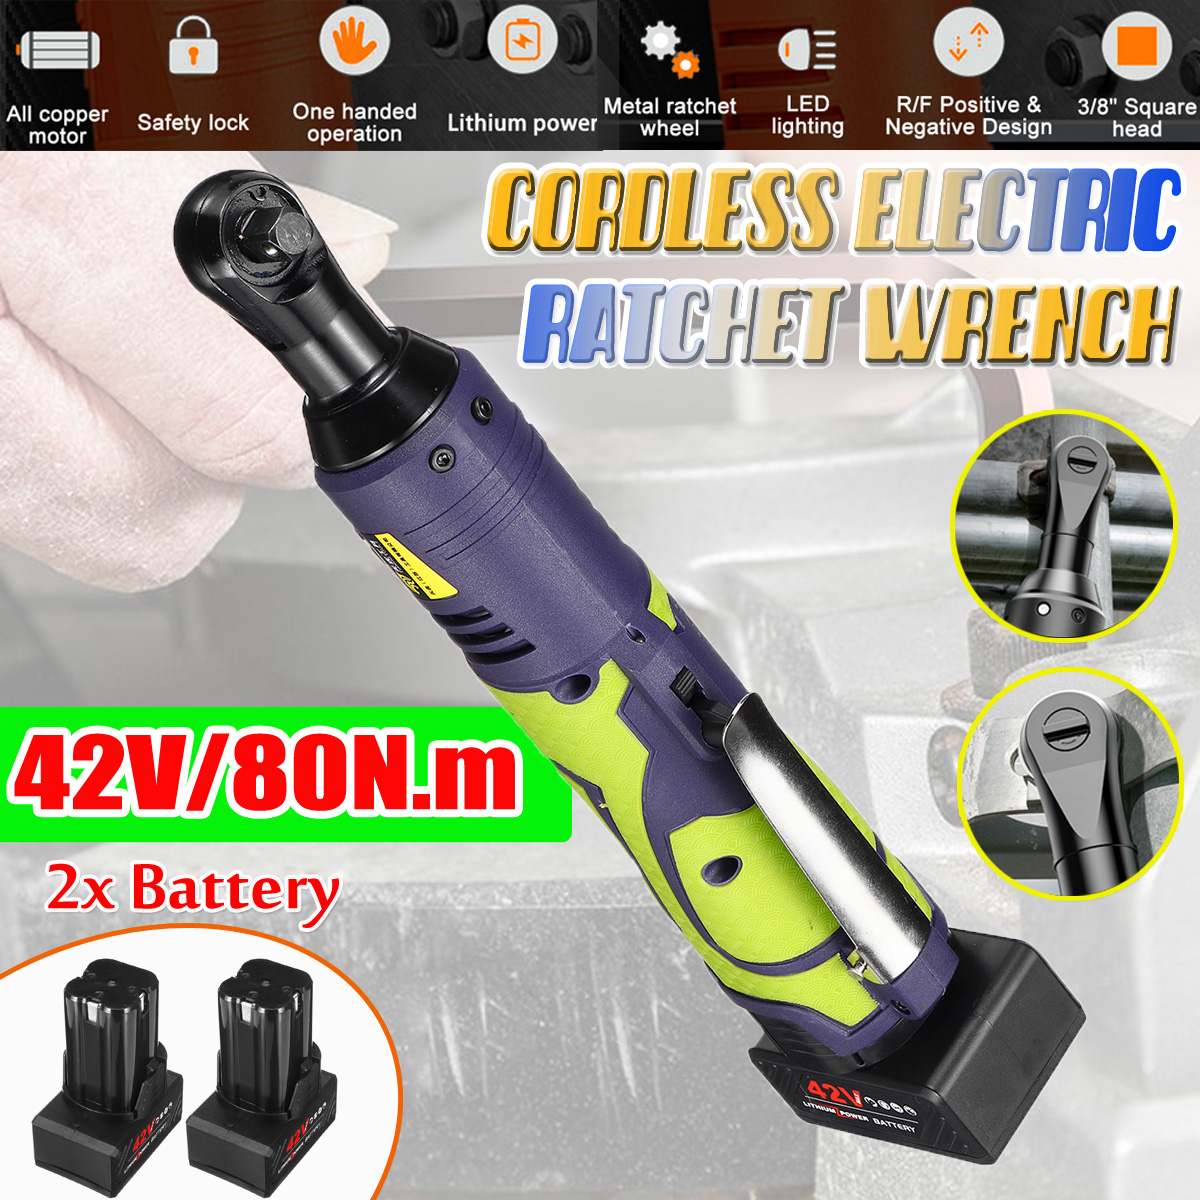 42V Rechargeable Electric Wrench 3/8" Ratchet Wrench 80N.M Cordless Ratchet Wrench Scaffolding Tools with 2 Lithium Battery